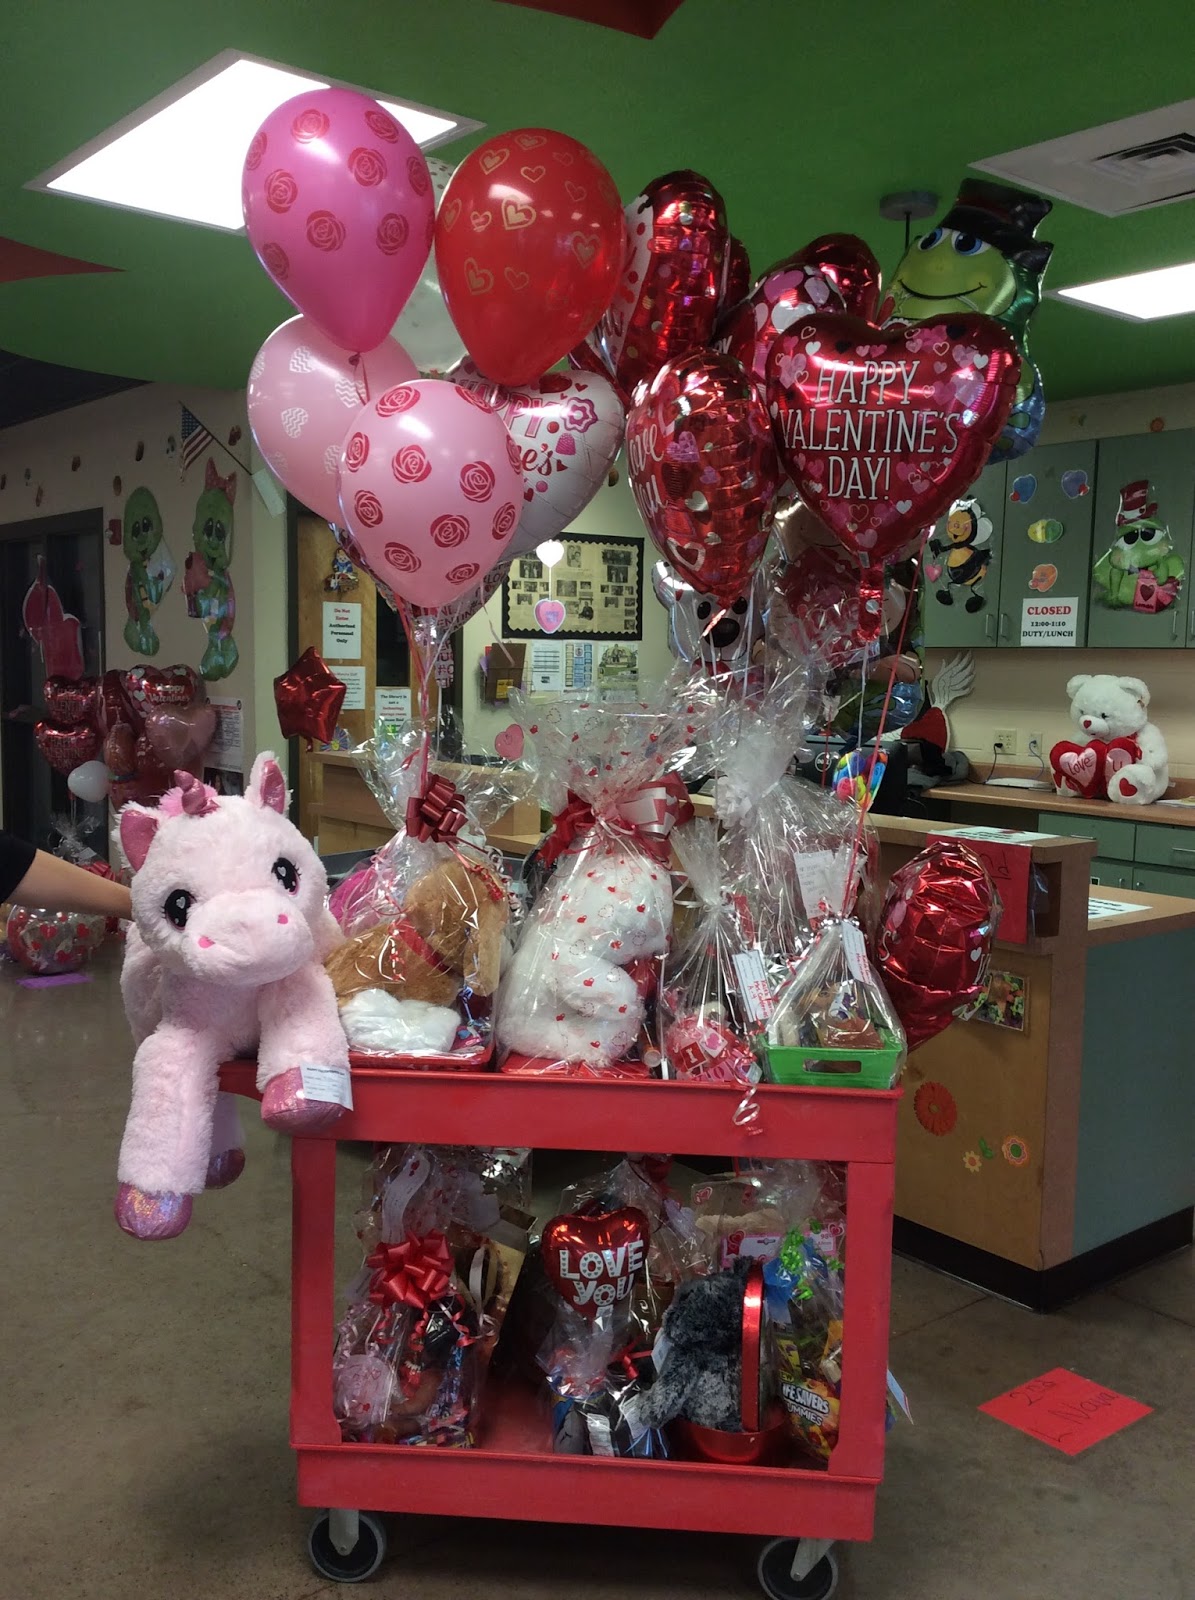 Eagle Pass ISD - iVision: Mustangs Celebrate Valentine's Day